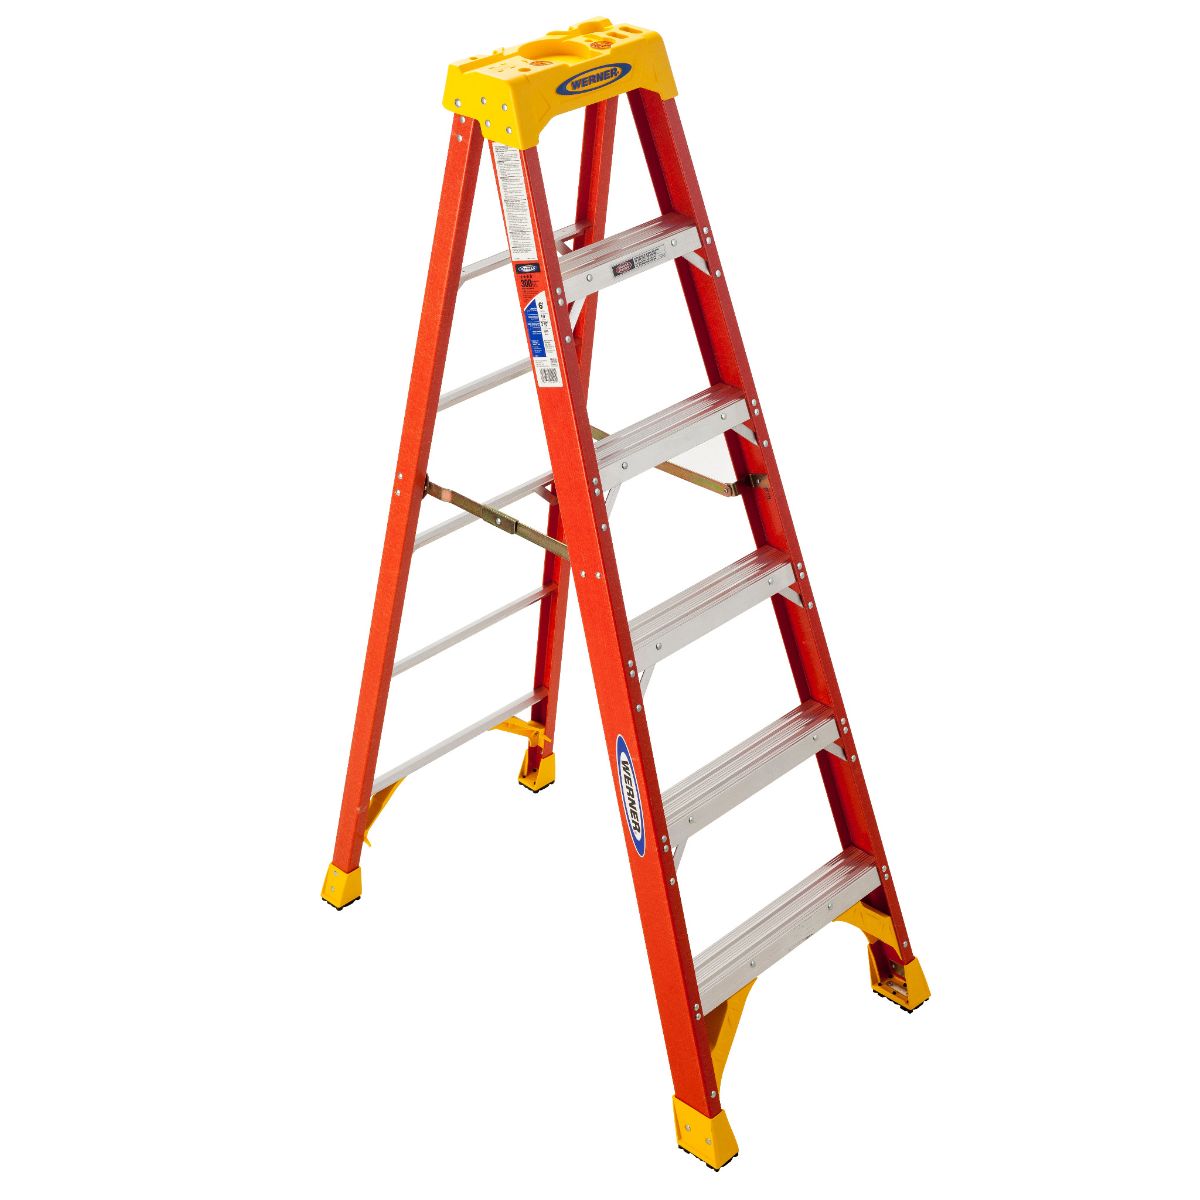 Industrial ladders for sale in Dallas, Texas